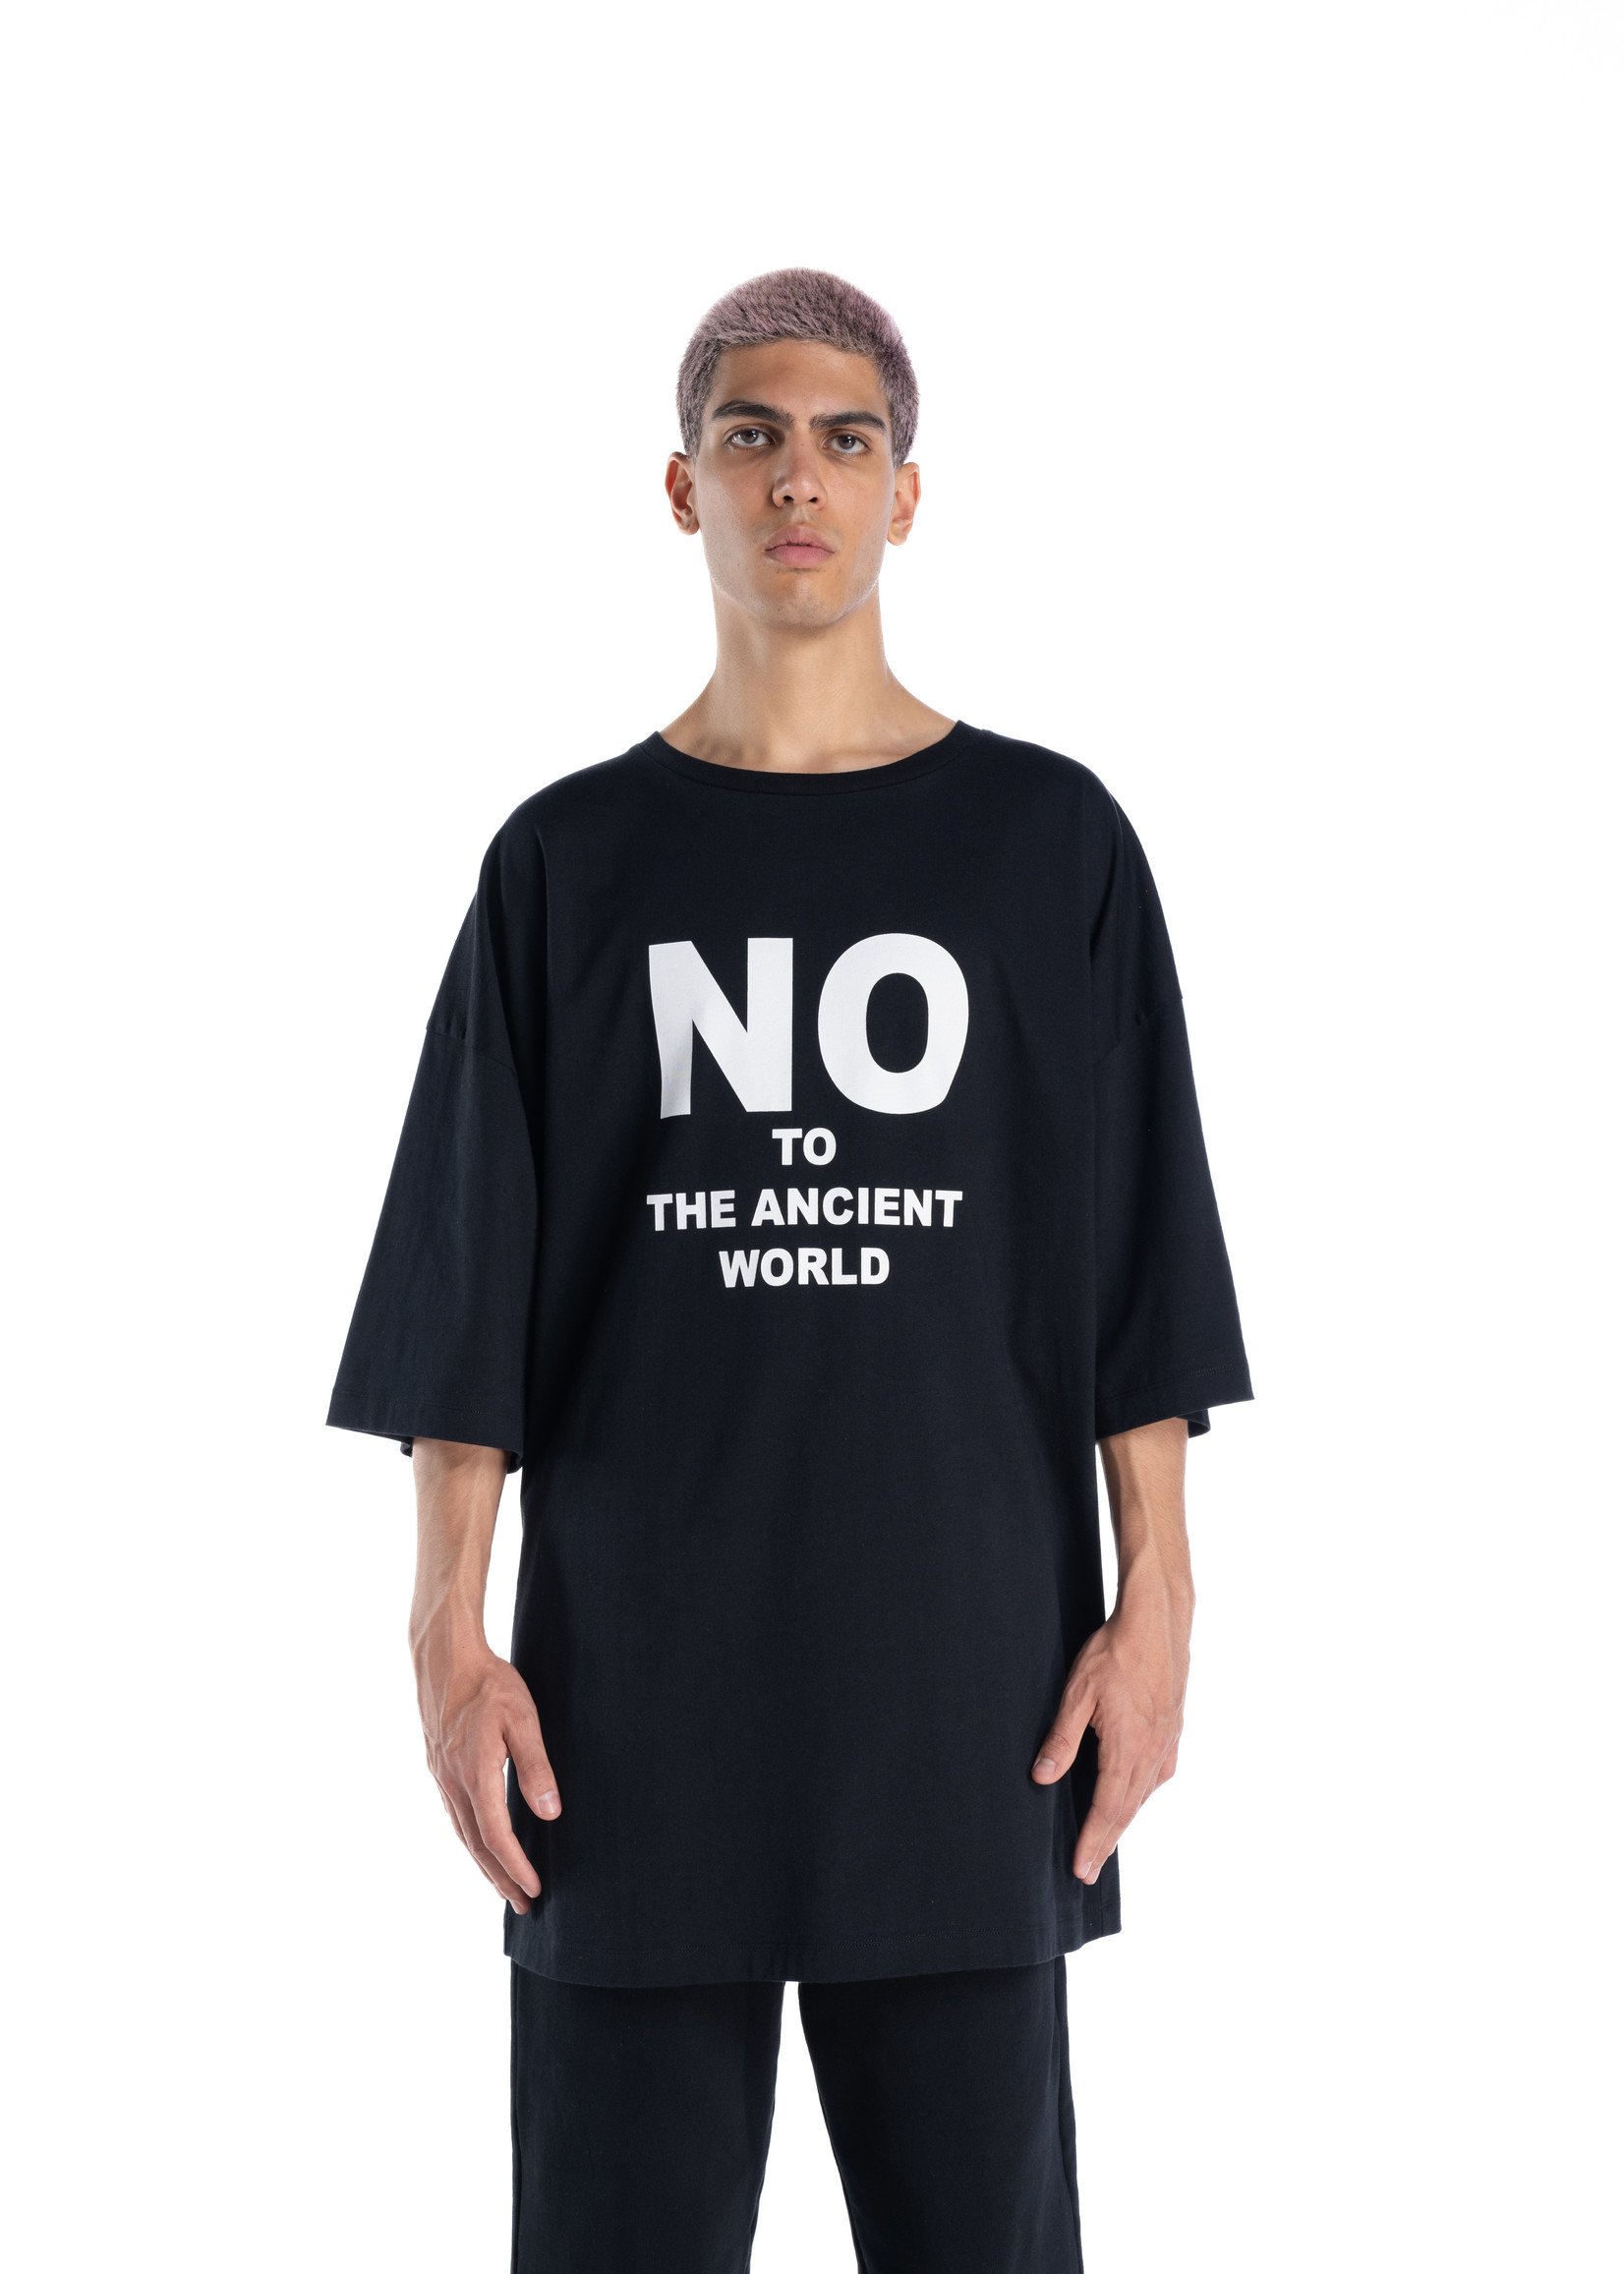 No Front - The youth word of the year' Men's T-Shirt